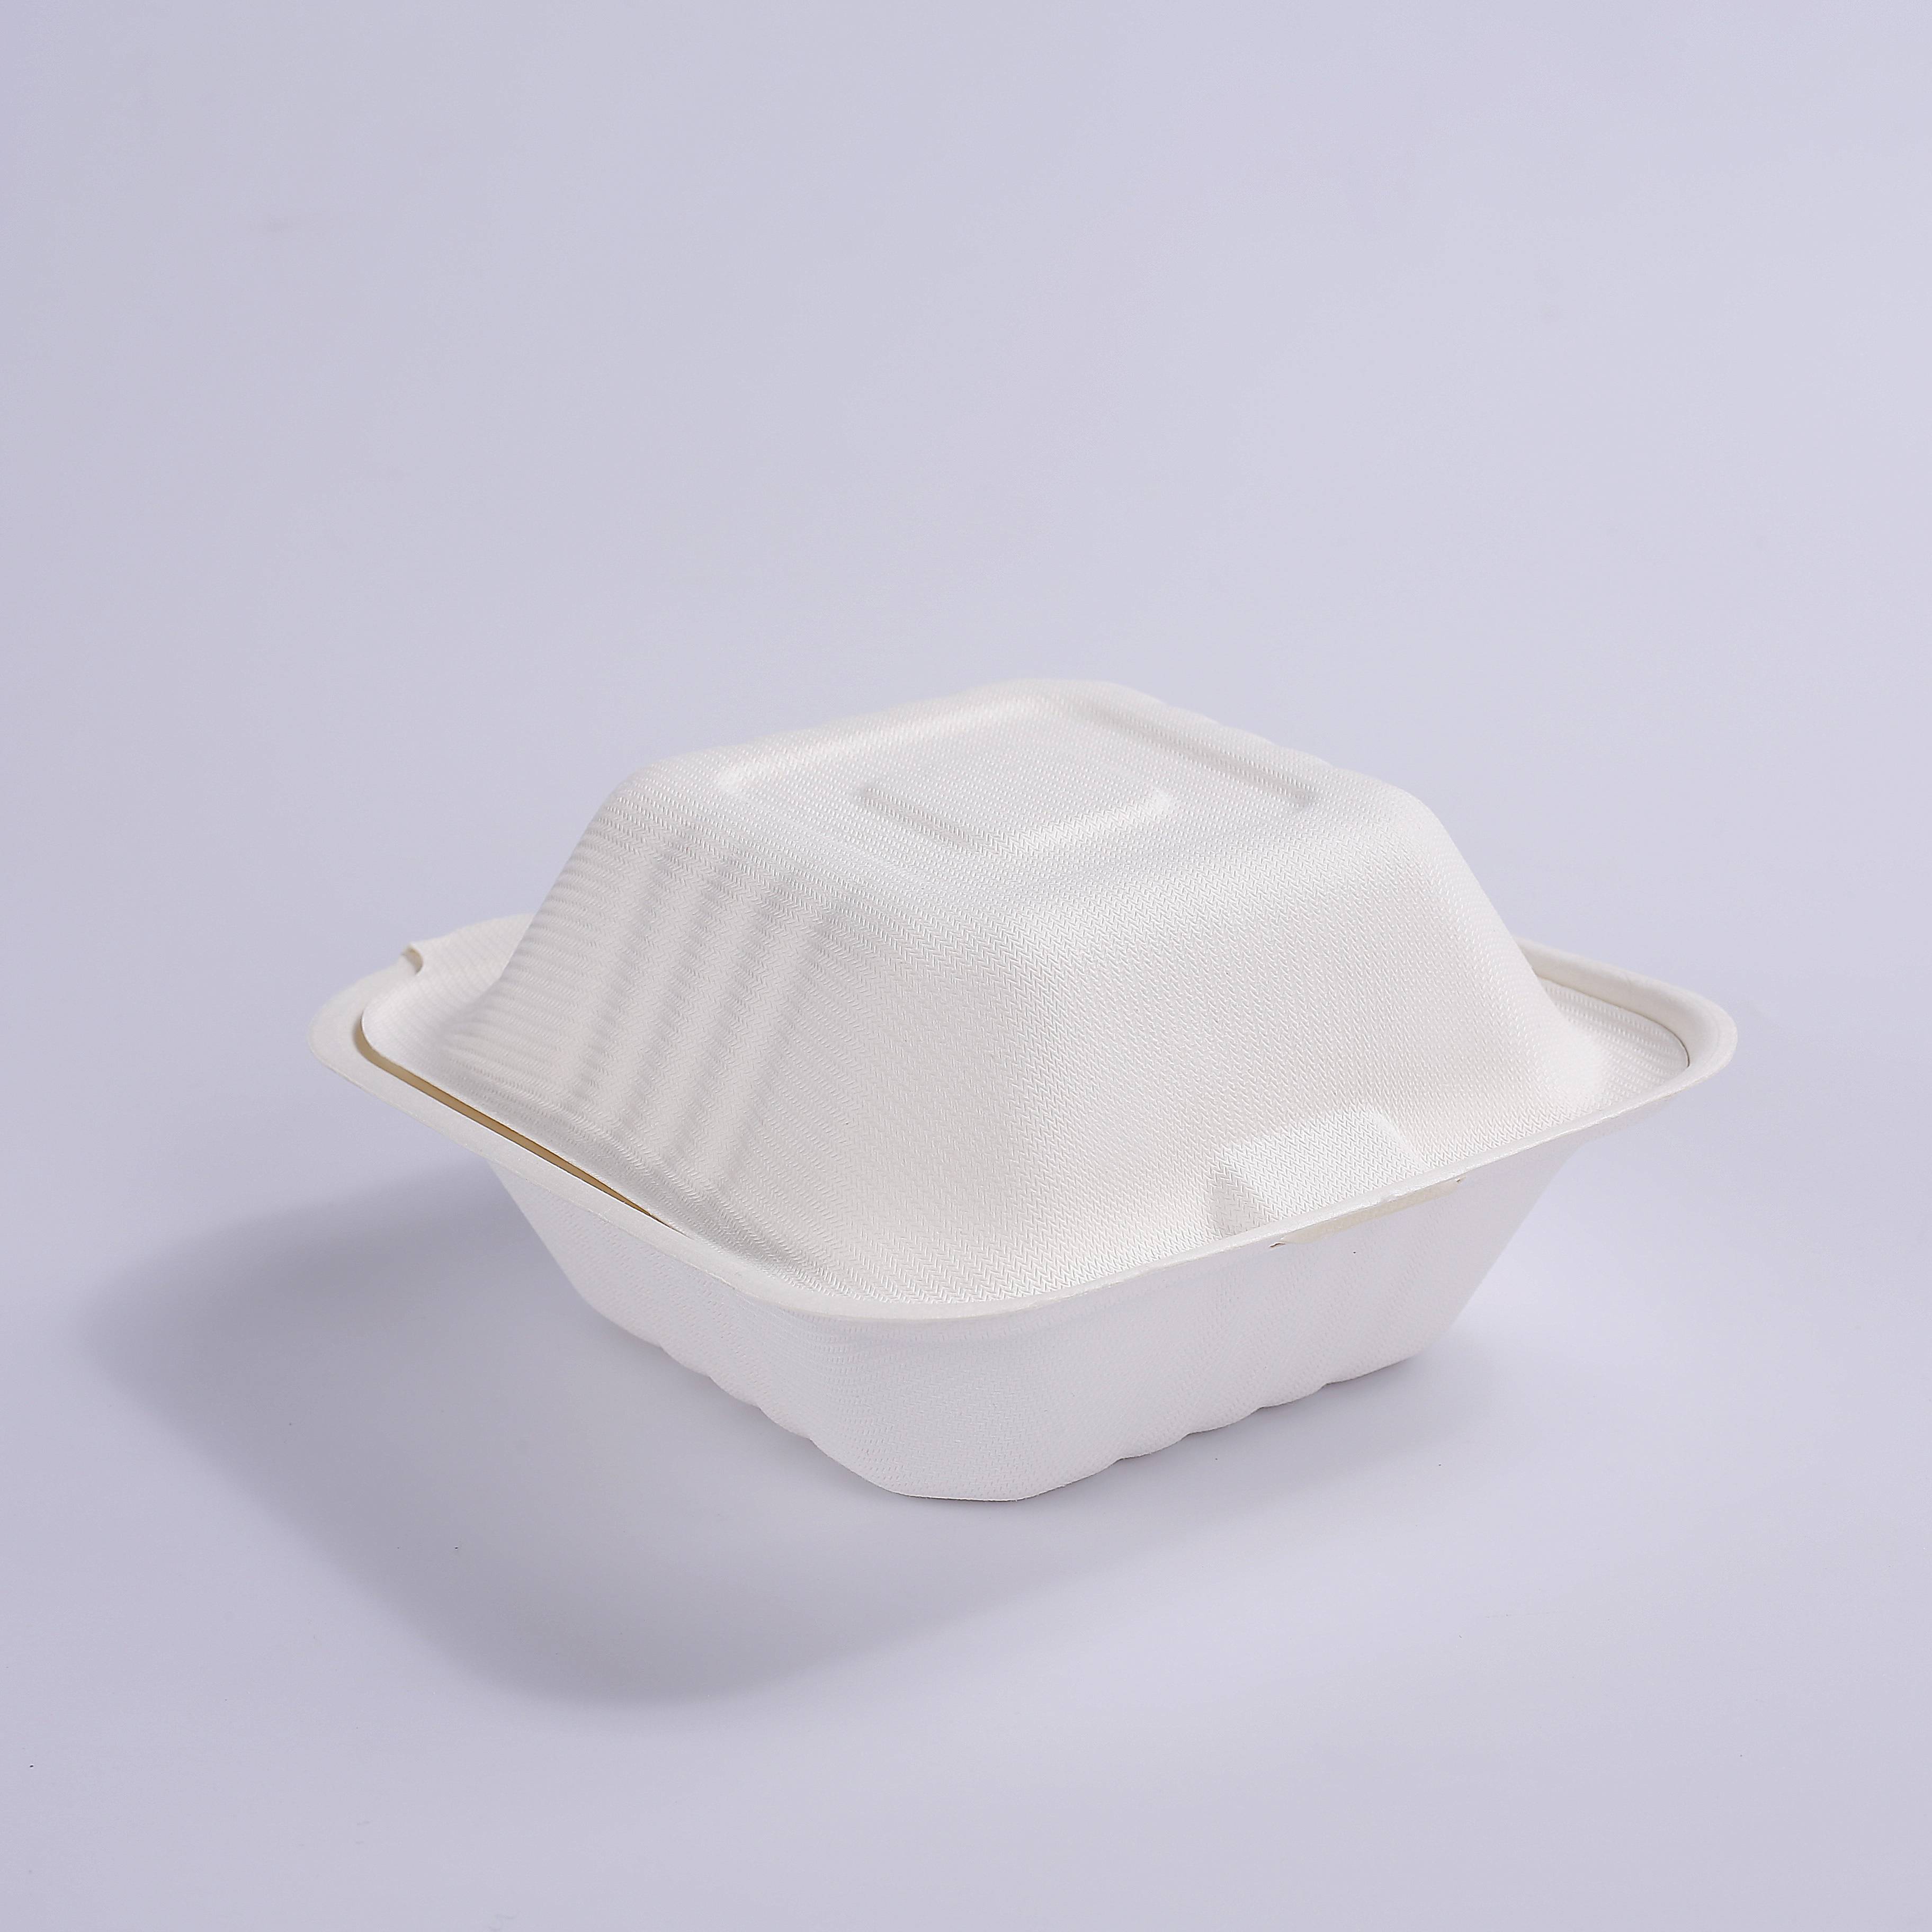 Hot Selling for Sugarcane Bagasse Hinged Clamshell - Bagasse 6*6″ Clamshell Takeout Containers, Biodegradable Eco Friendly Take Out to Go Food Containers with Lids for Lunch Leftover Meal Pr...